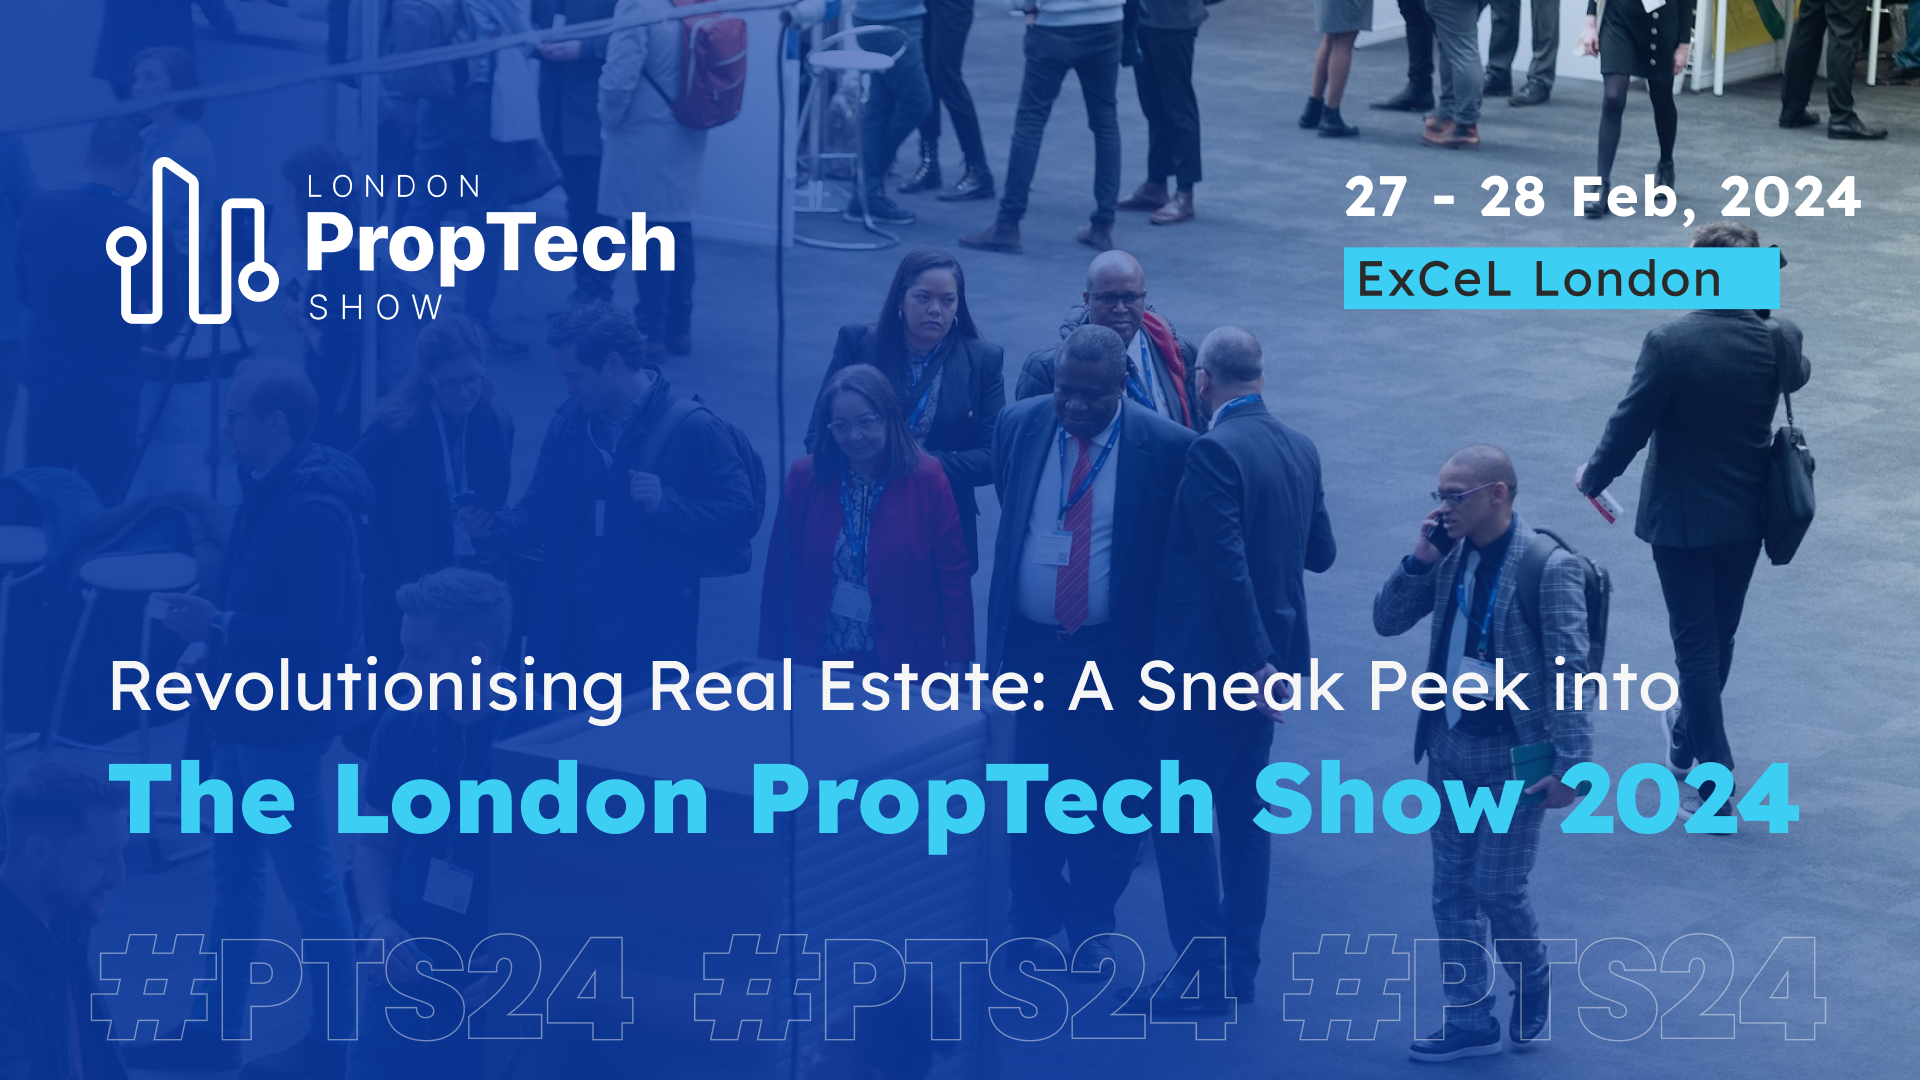 Revolutionising Real Estate: A Sneak Peek into the London PropTech Show 2024